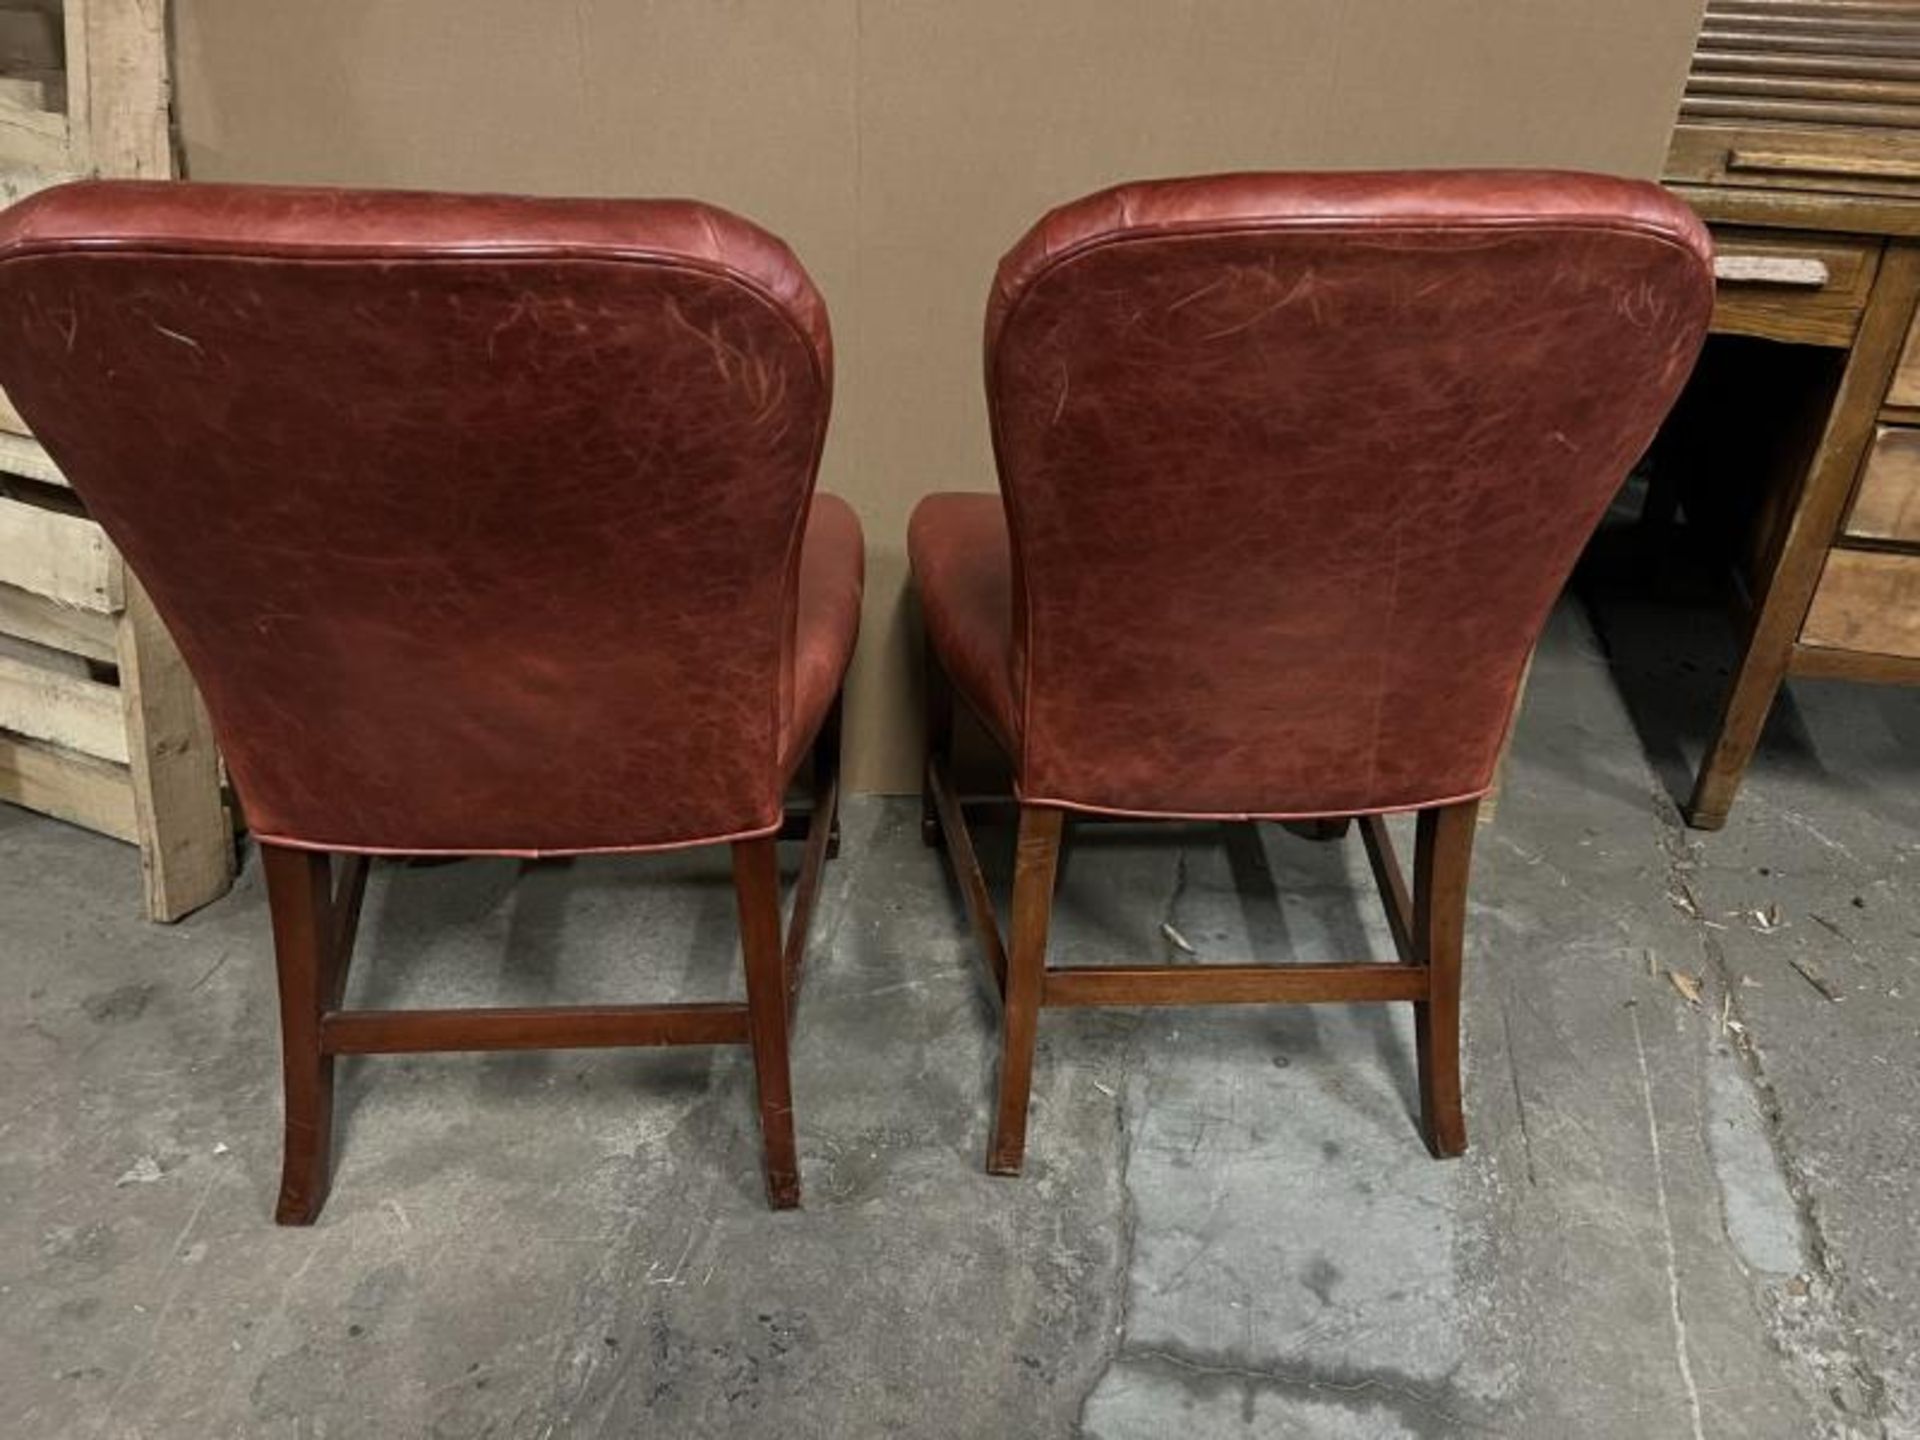 Pair of Red Vinyl Chairs; Located in Mill Building - Image 12 of 20